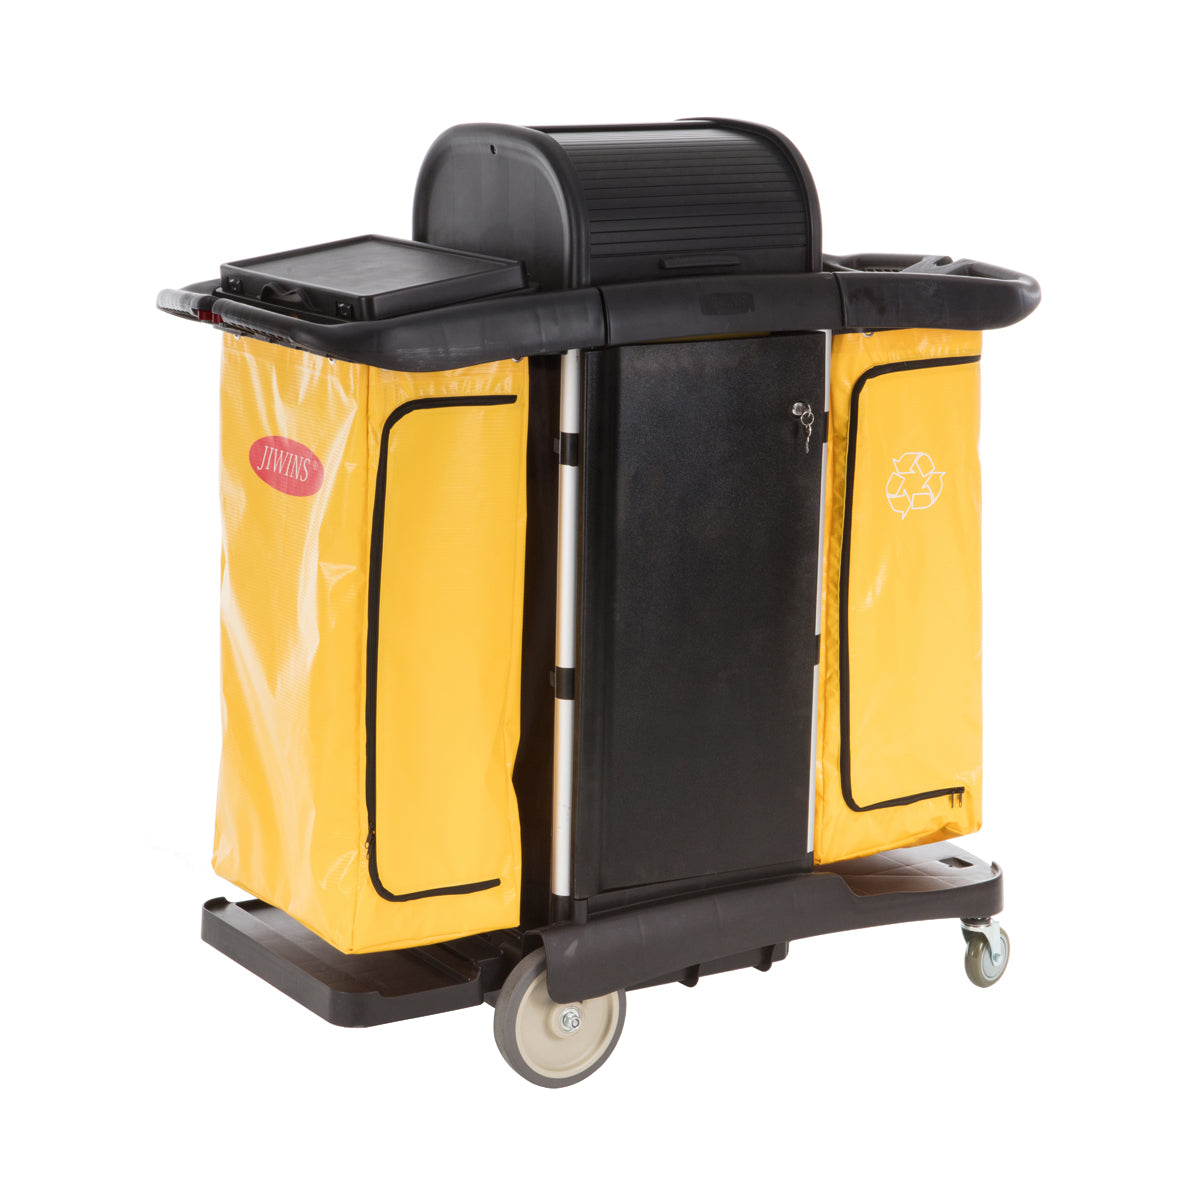 JW-CCMS Jiwins Medical Places Special Cleaning Cart Black 1300x570x1320mm Tomkin Australia Hospitality Supplies